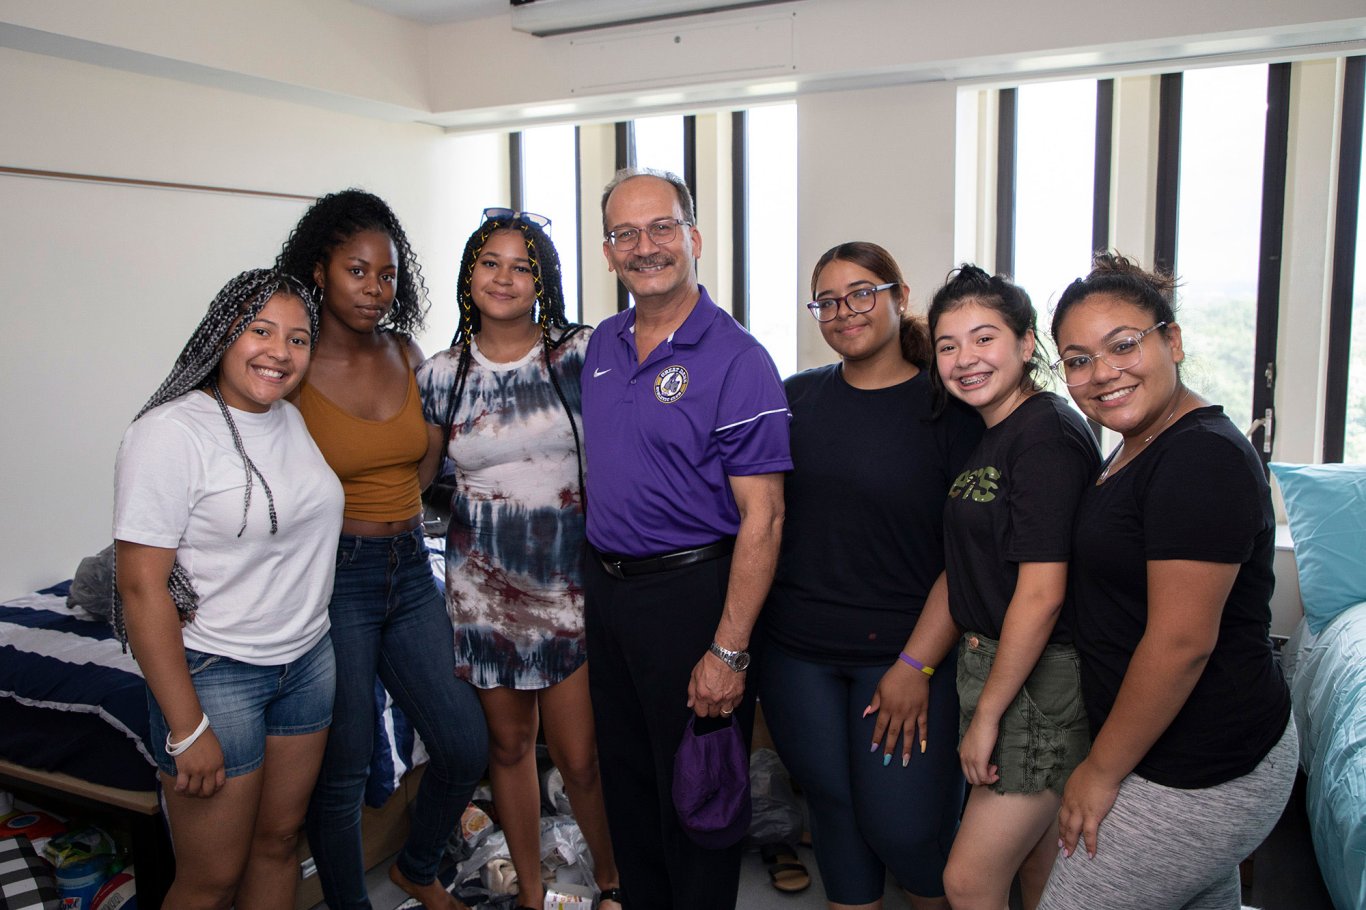 University President standing with a group of students during move in.